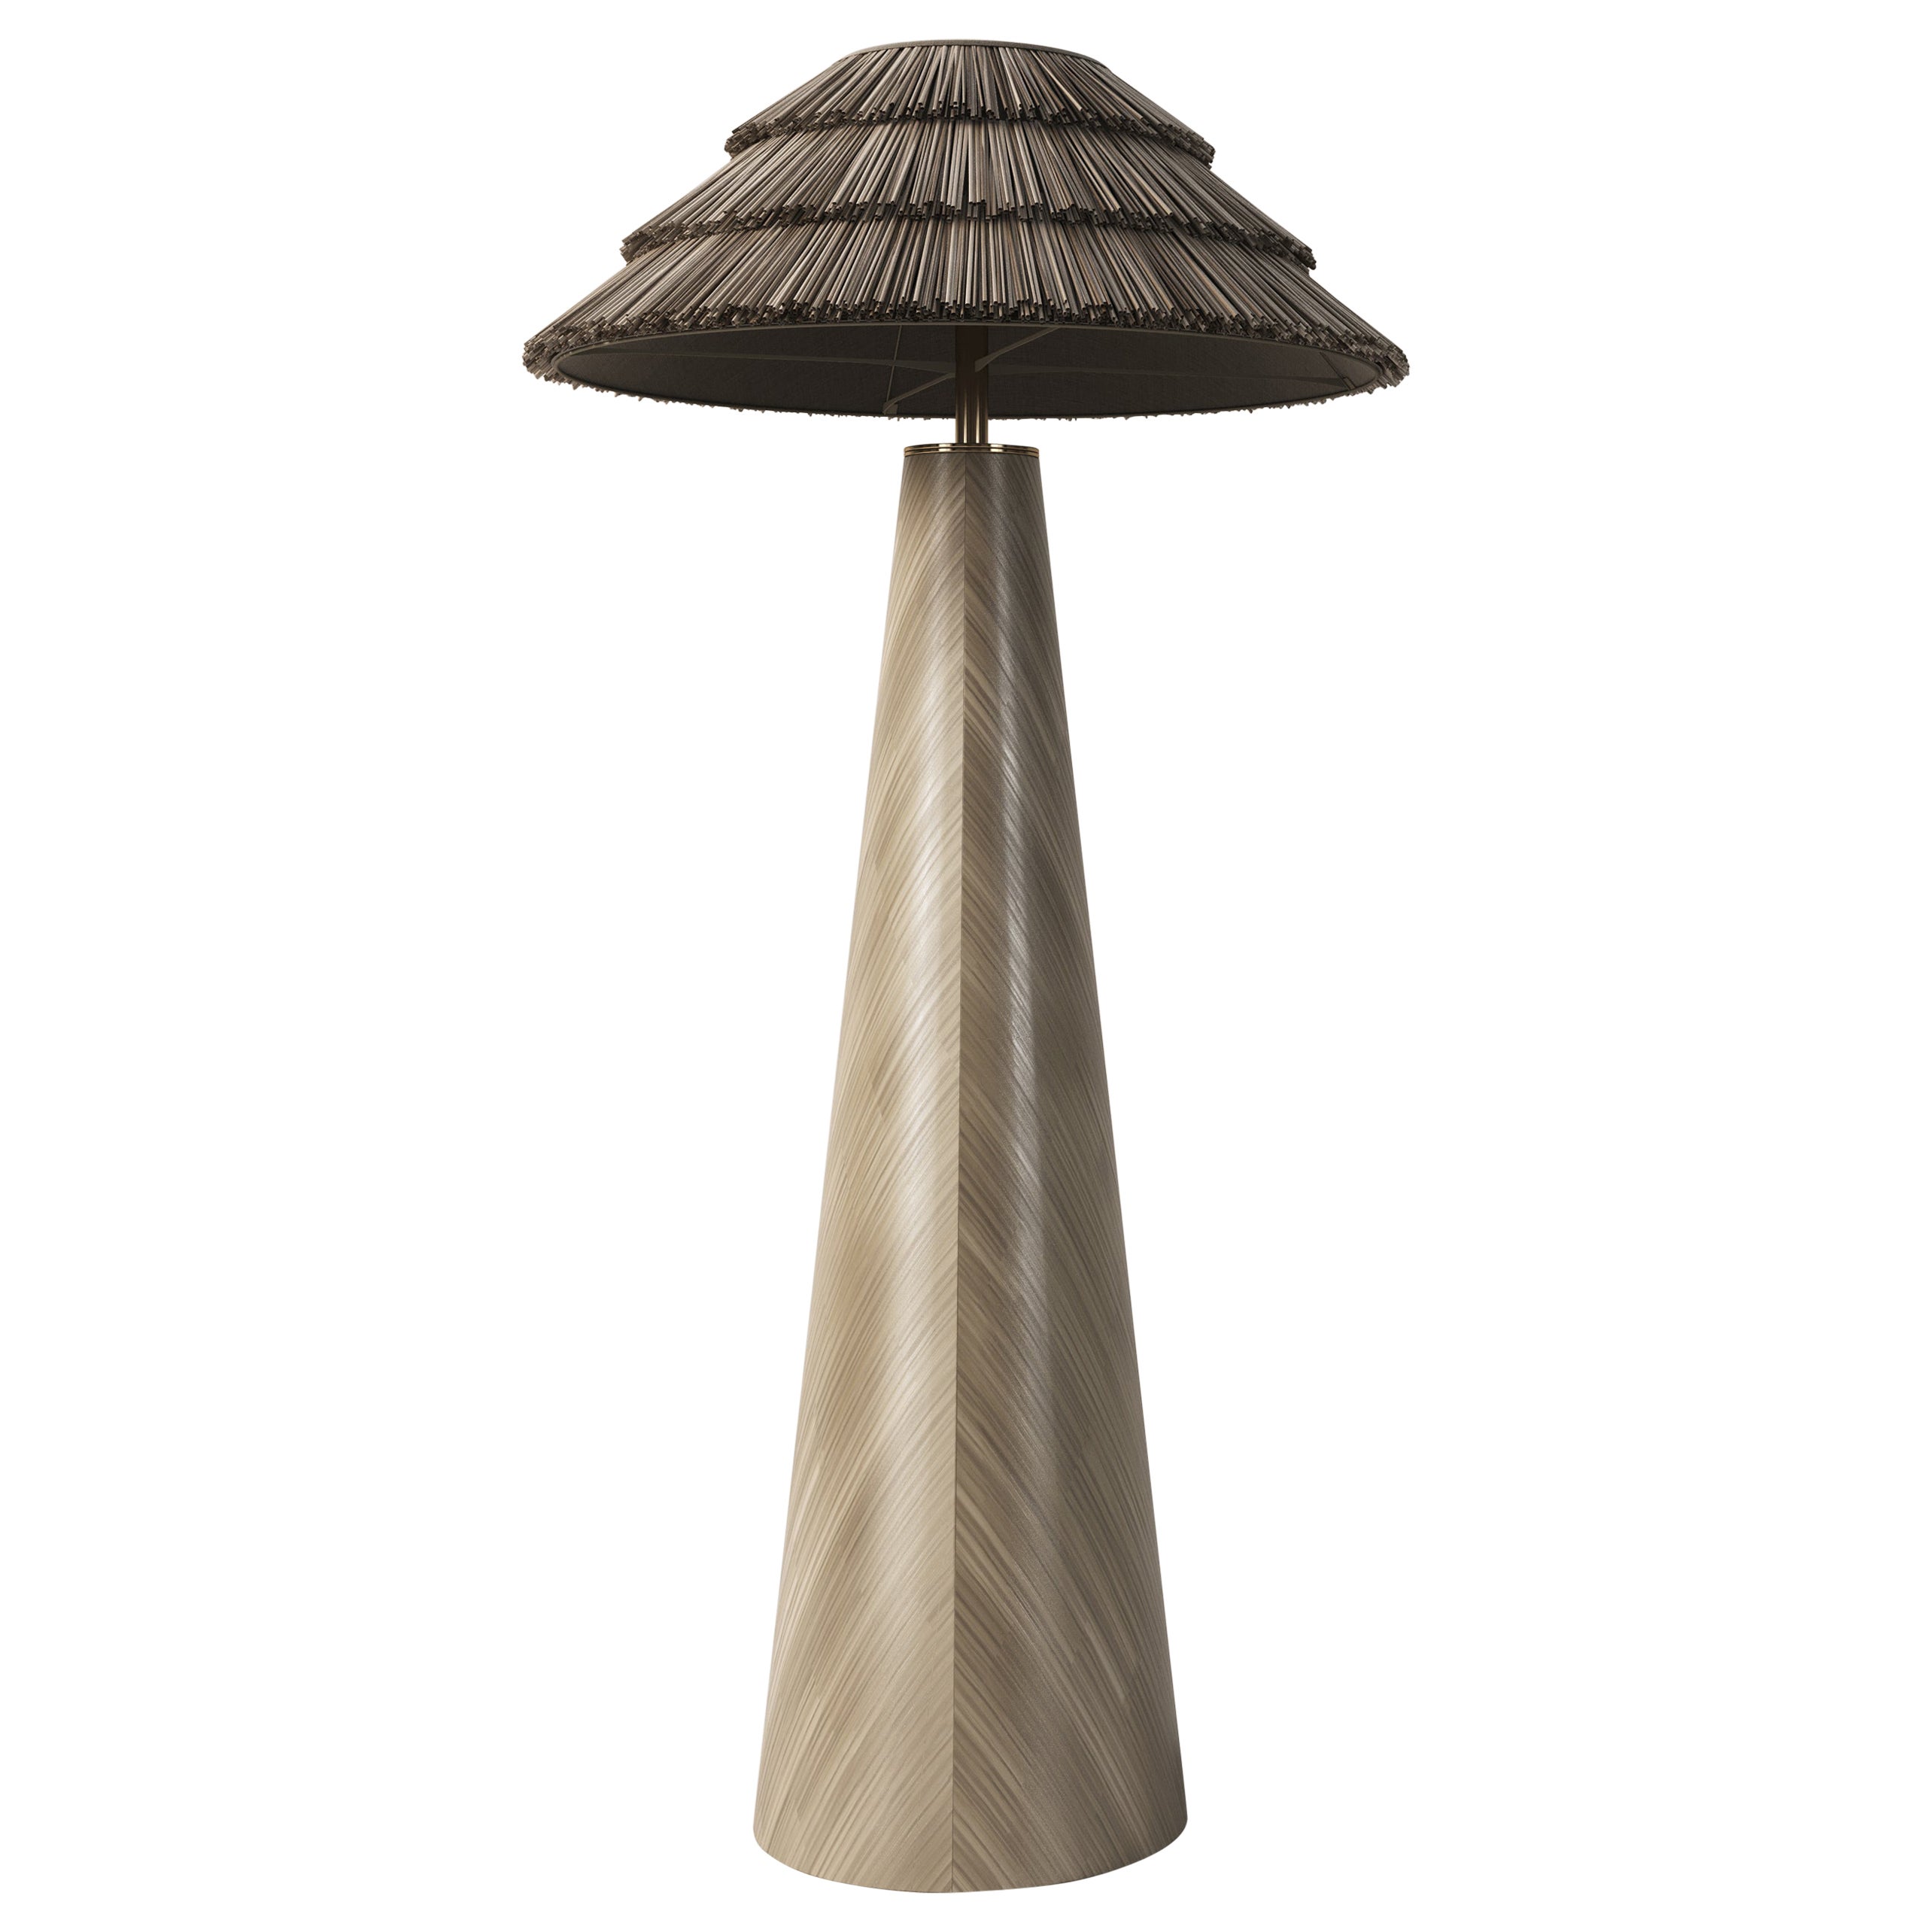 Contemporary Floor Lamp “Roots of Home” by Ruda Studio